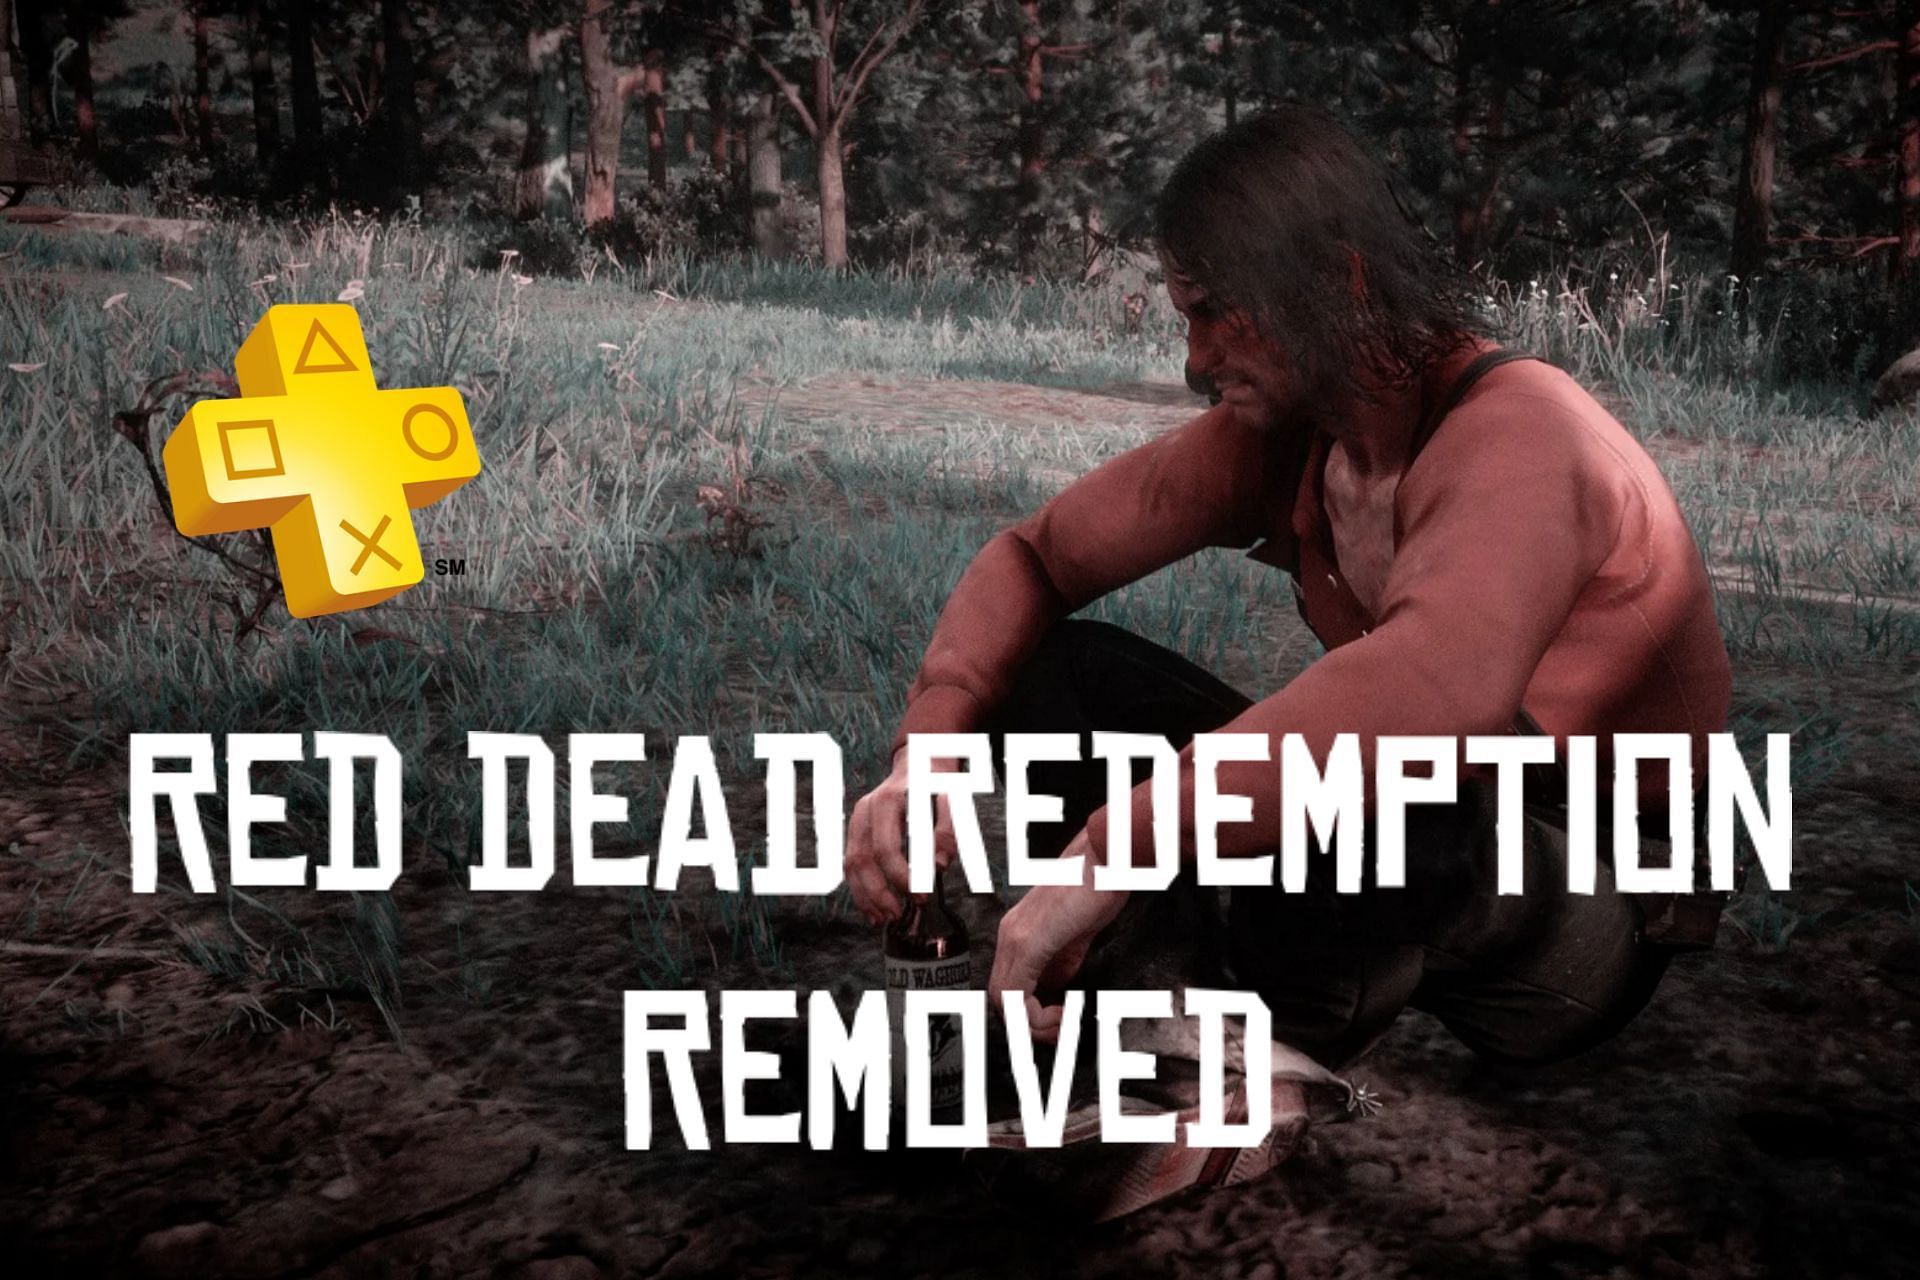 Red Dead Redemption removed from PS Plus and PS Now streaming services